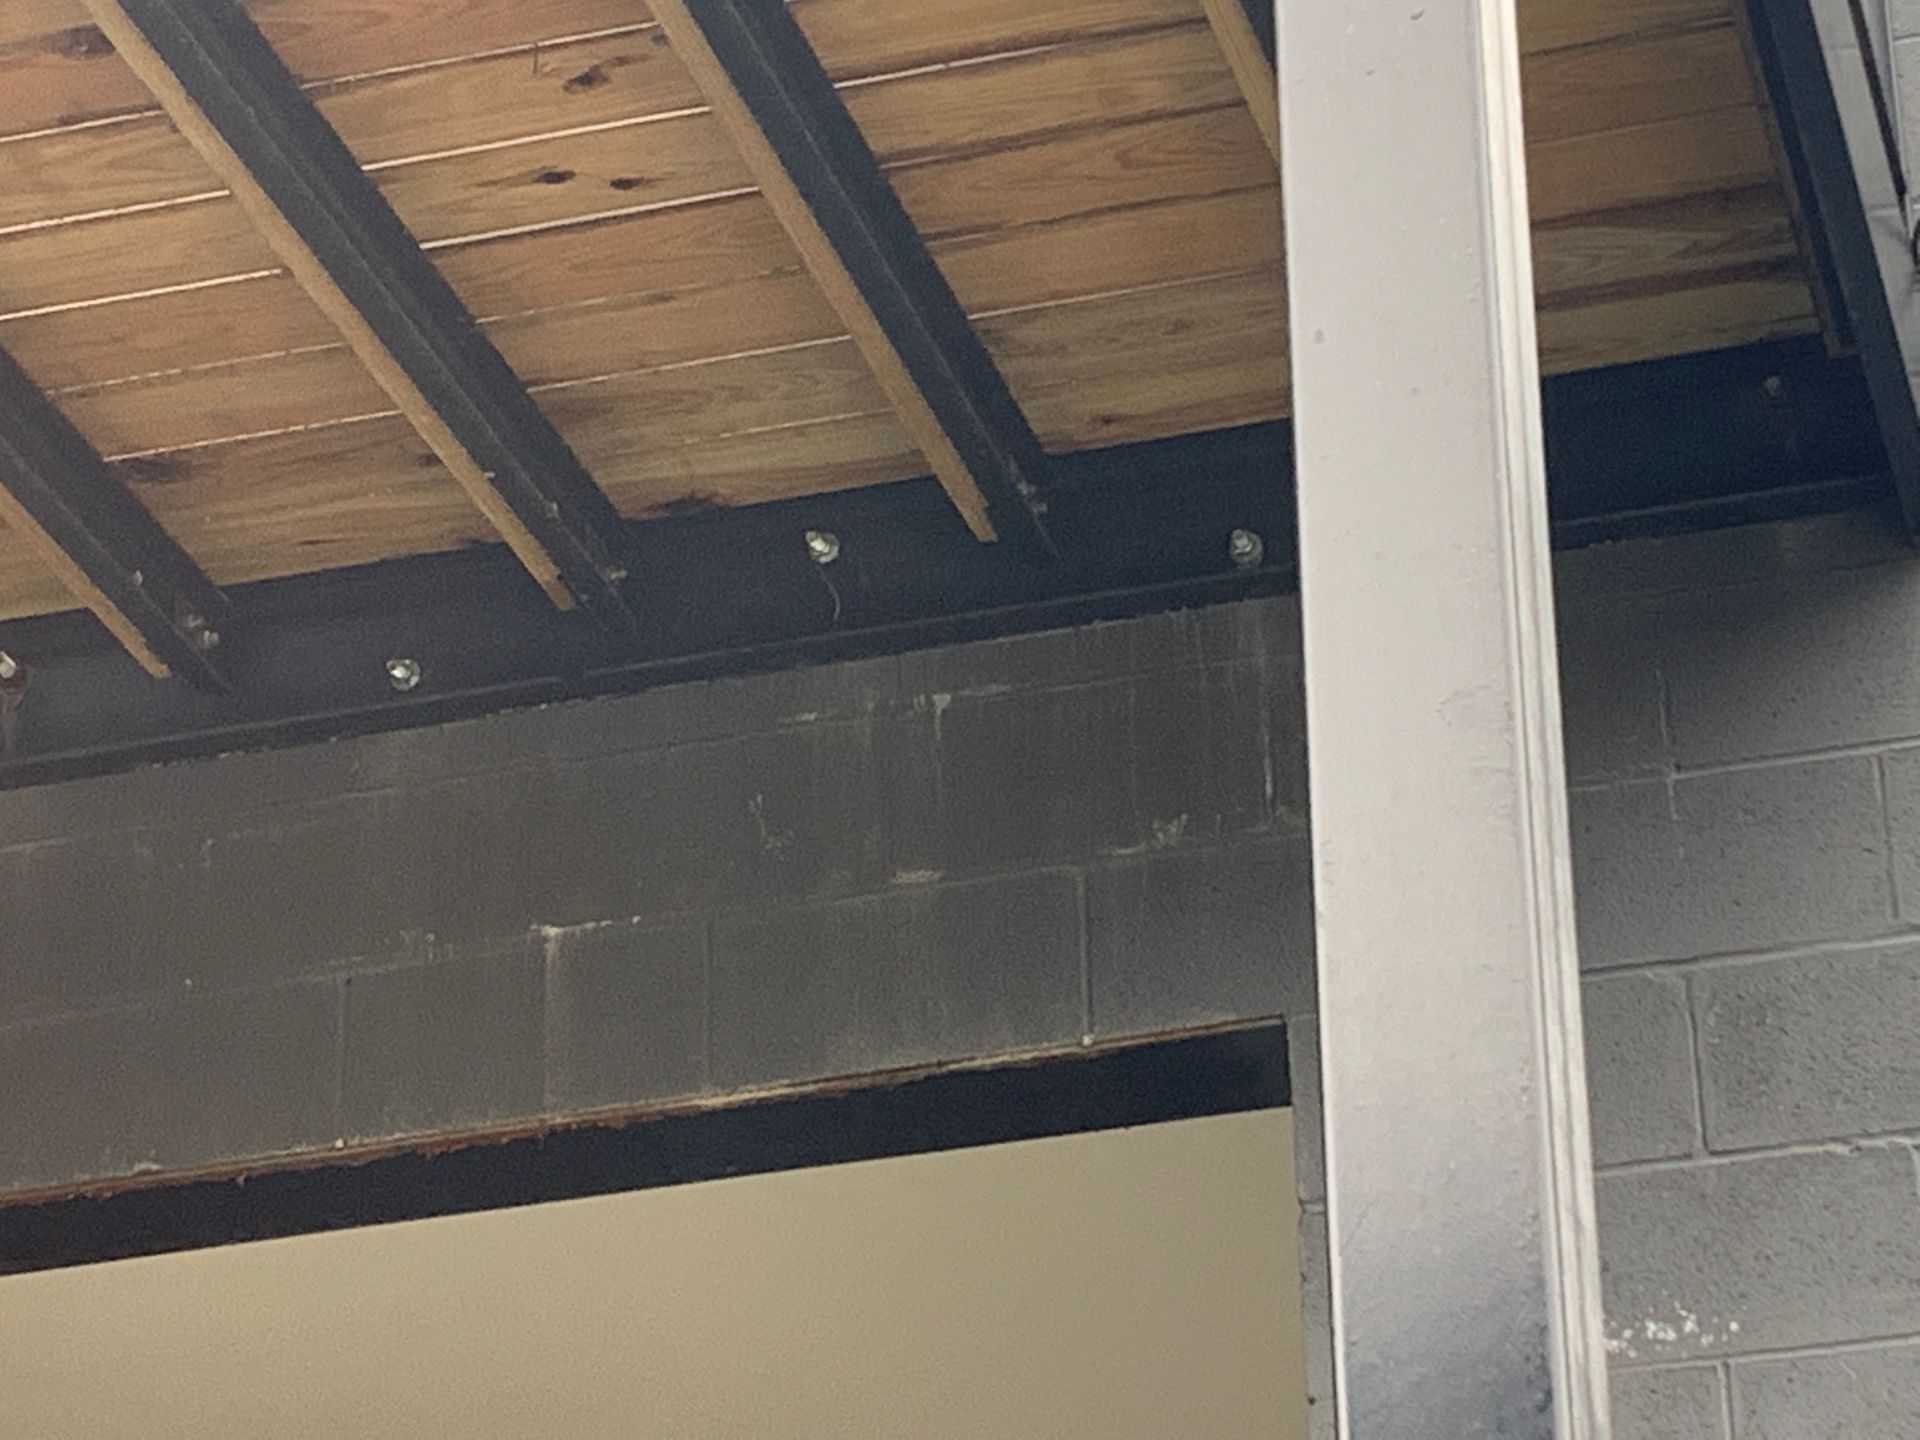 Leaking ledger board connections under balcony in Little Village, Chicago